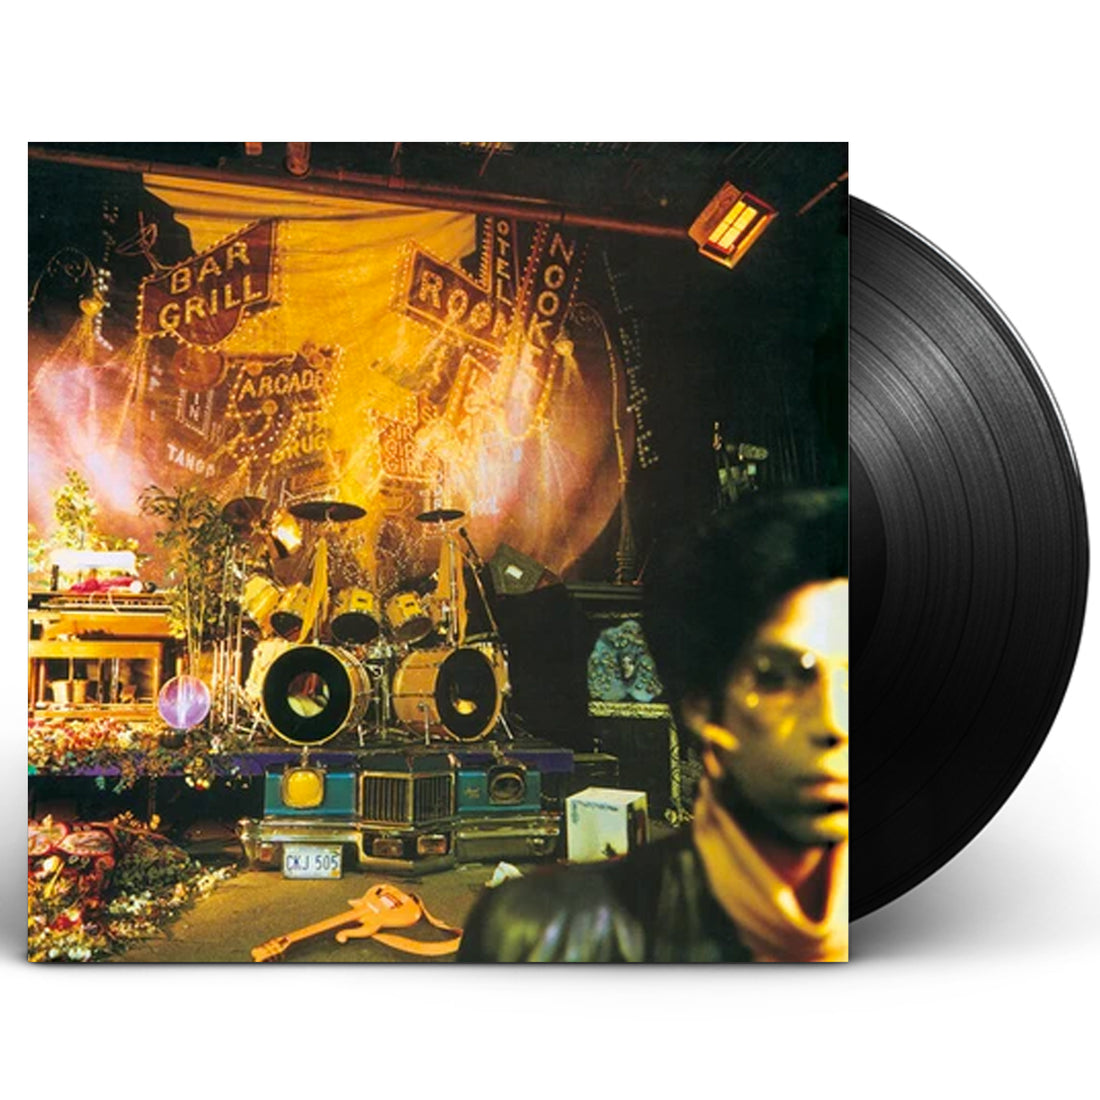 Prince "Sign O' The Times" Remastered 2xLP Vinyl 180g